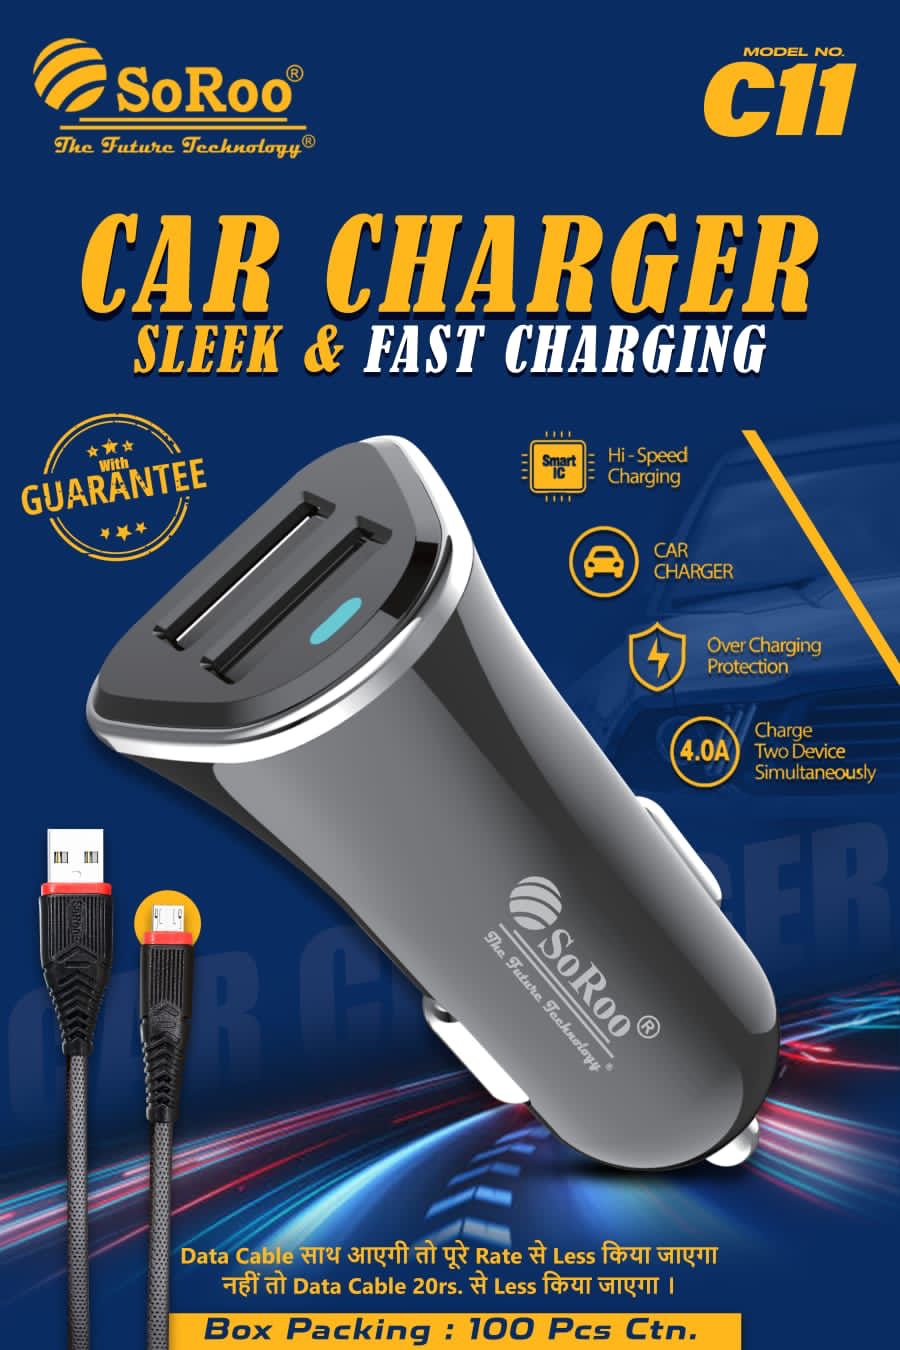 Soroo Car Mobile Charger C-11